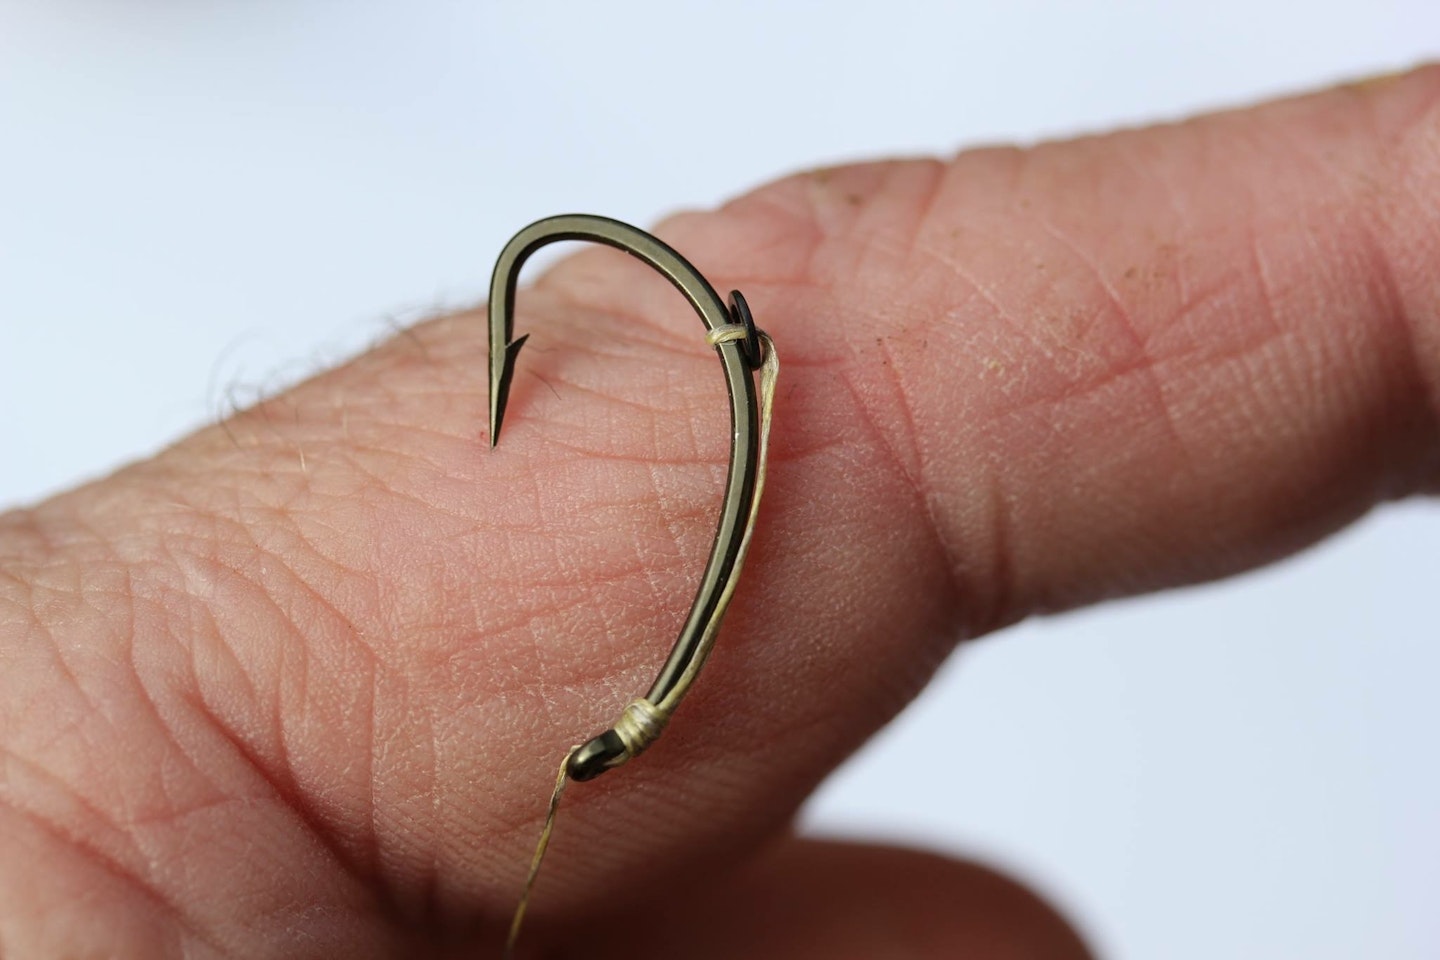 Why you need to use the Slip D-Rig in your carp fishing…